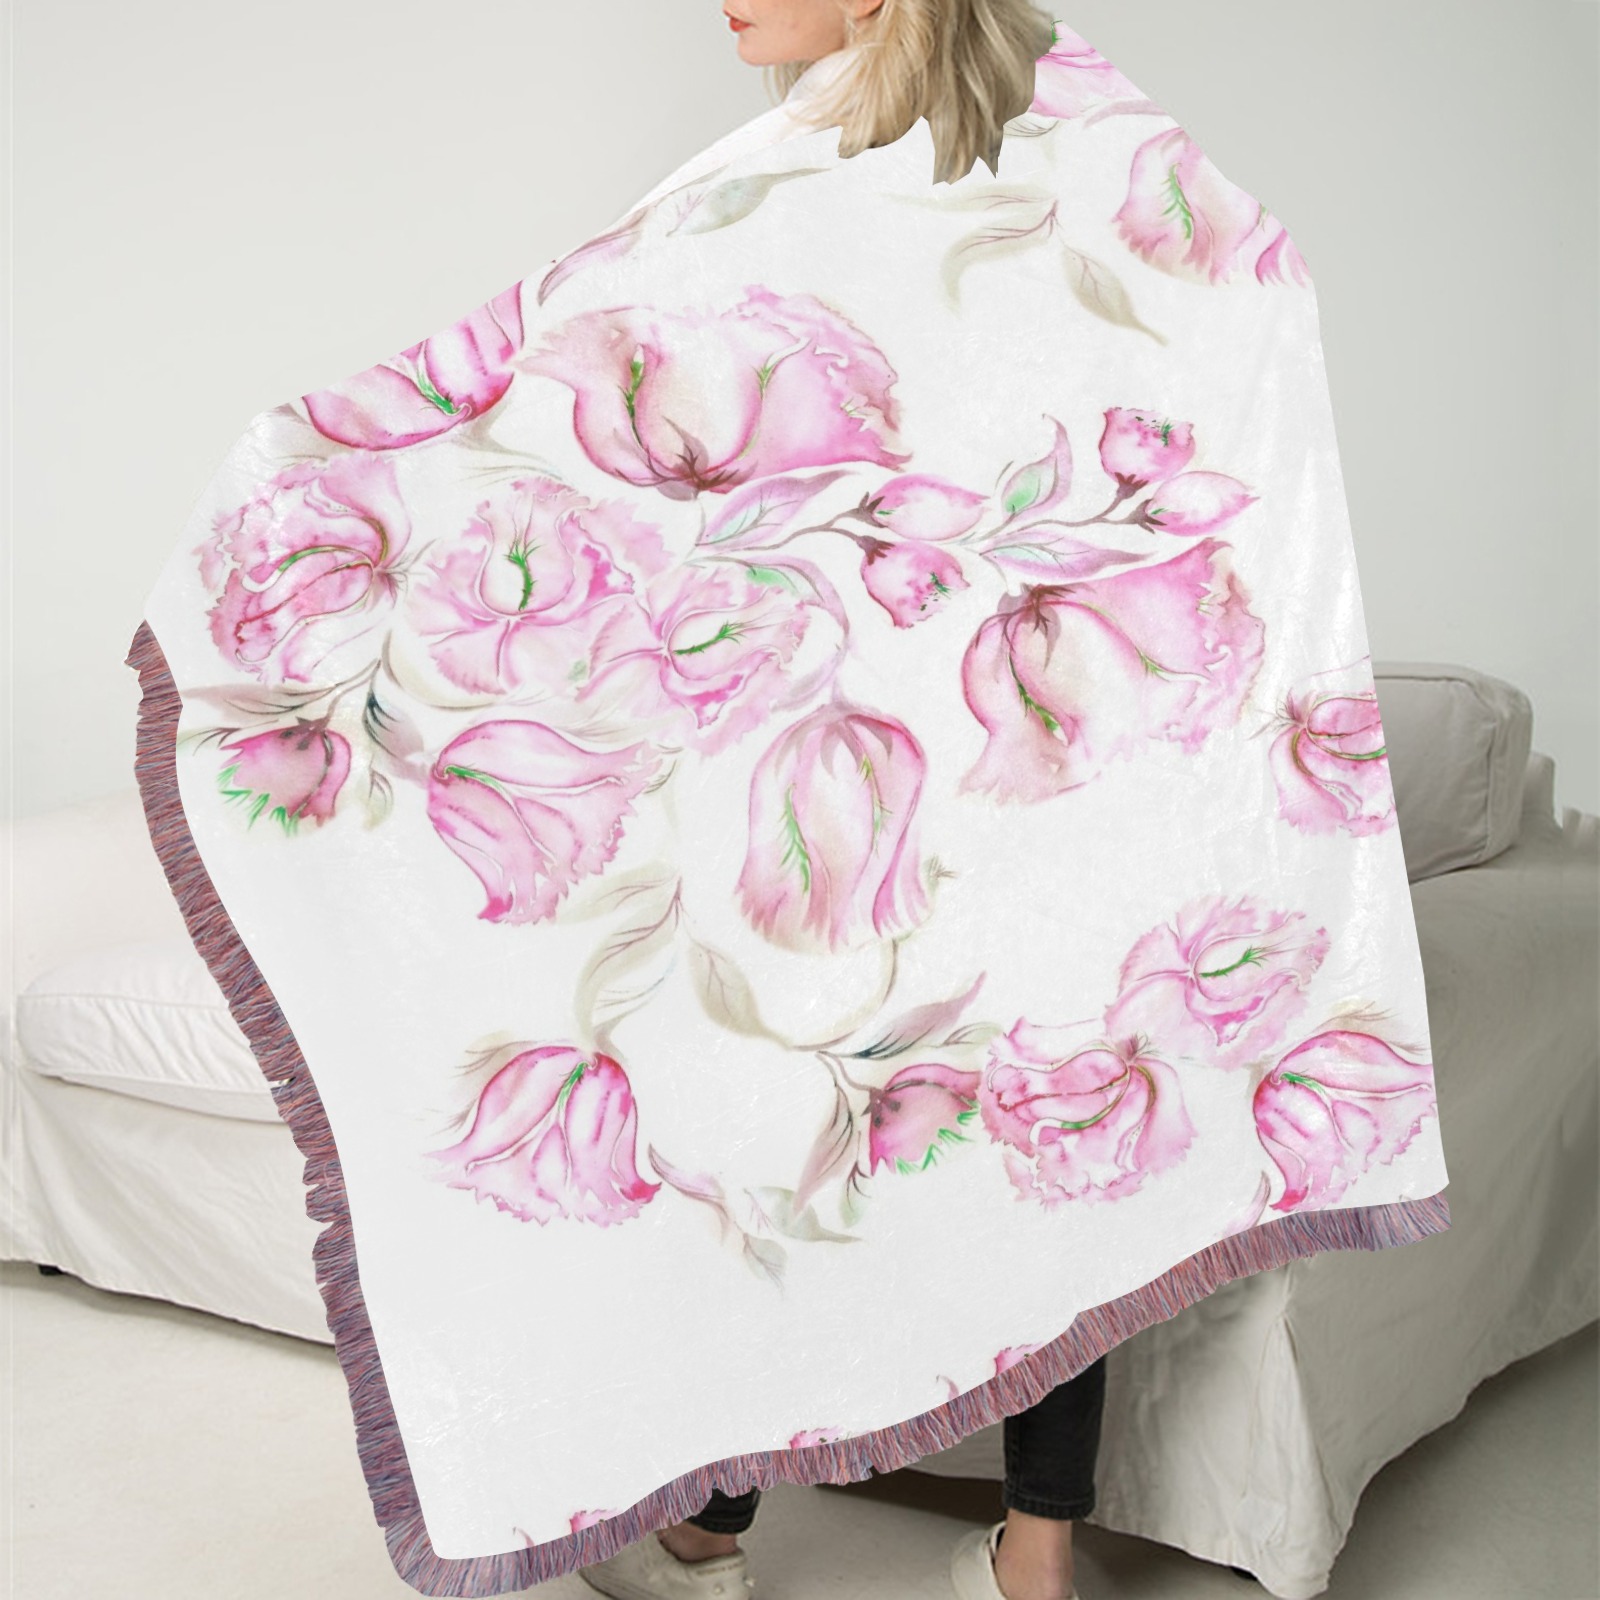 Chinese Peonies 3 Ultra-Soft Fringe Blanket 40"x50" (Mixed Pink)